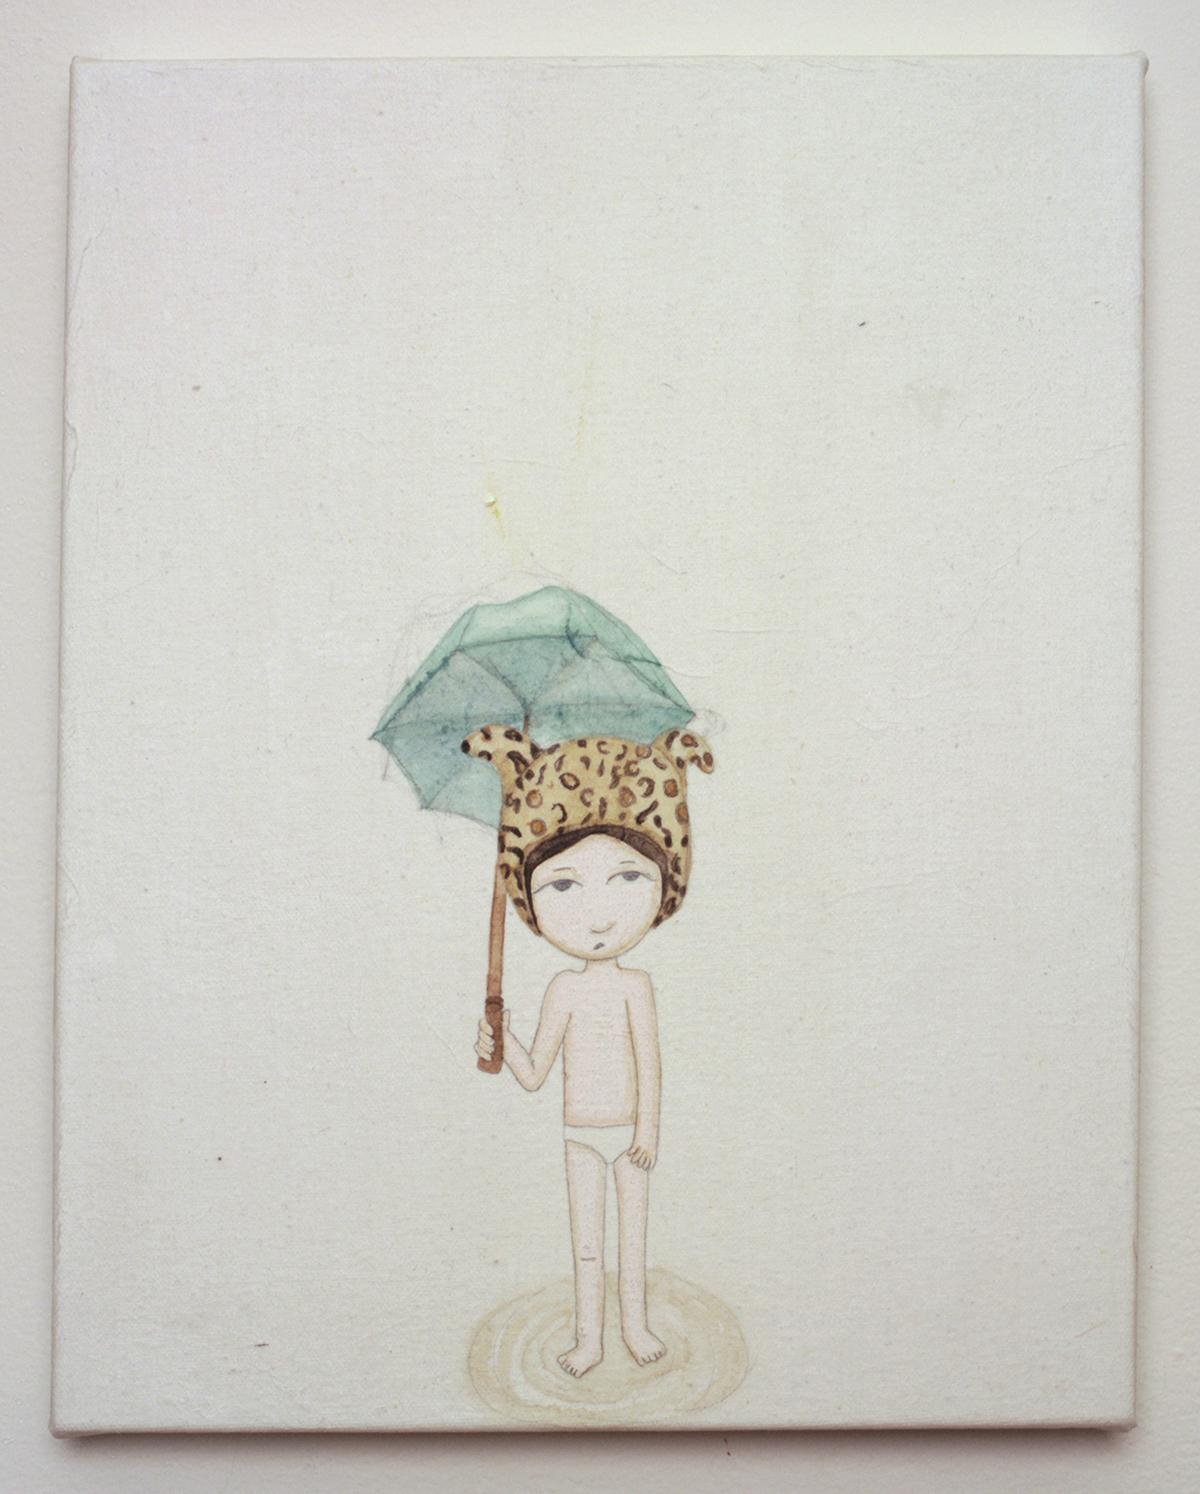 Artwork by Kyung Jeon titled Leopard In The Rain, Watercolor and pencil on rice paper/canvas/panel, 14 x 11 inches, 35.6 x 27.9 cm